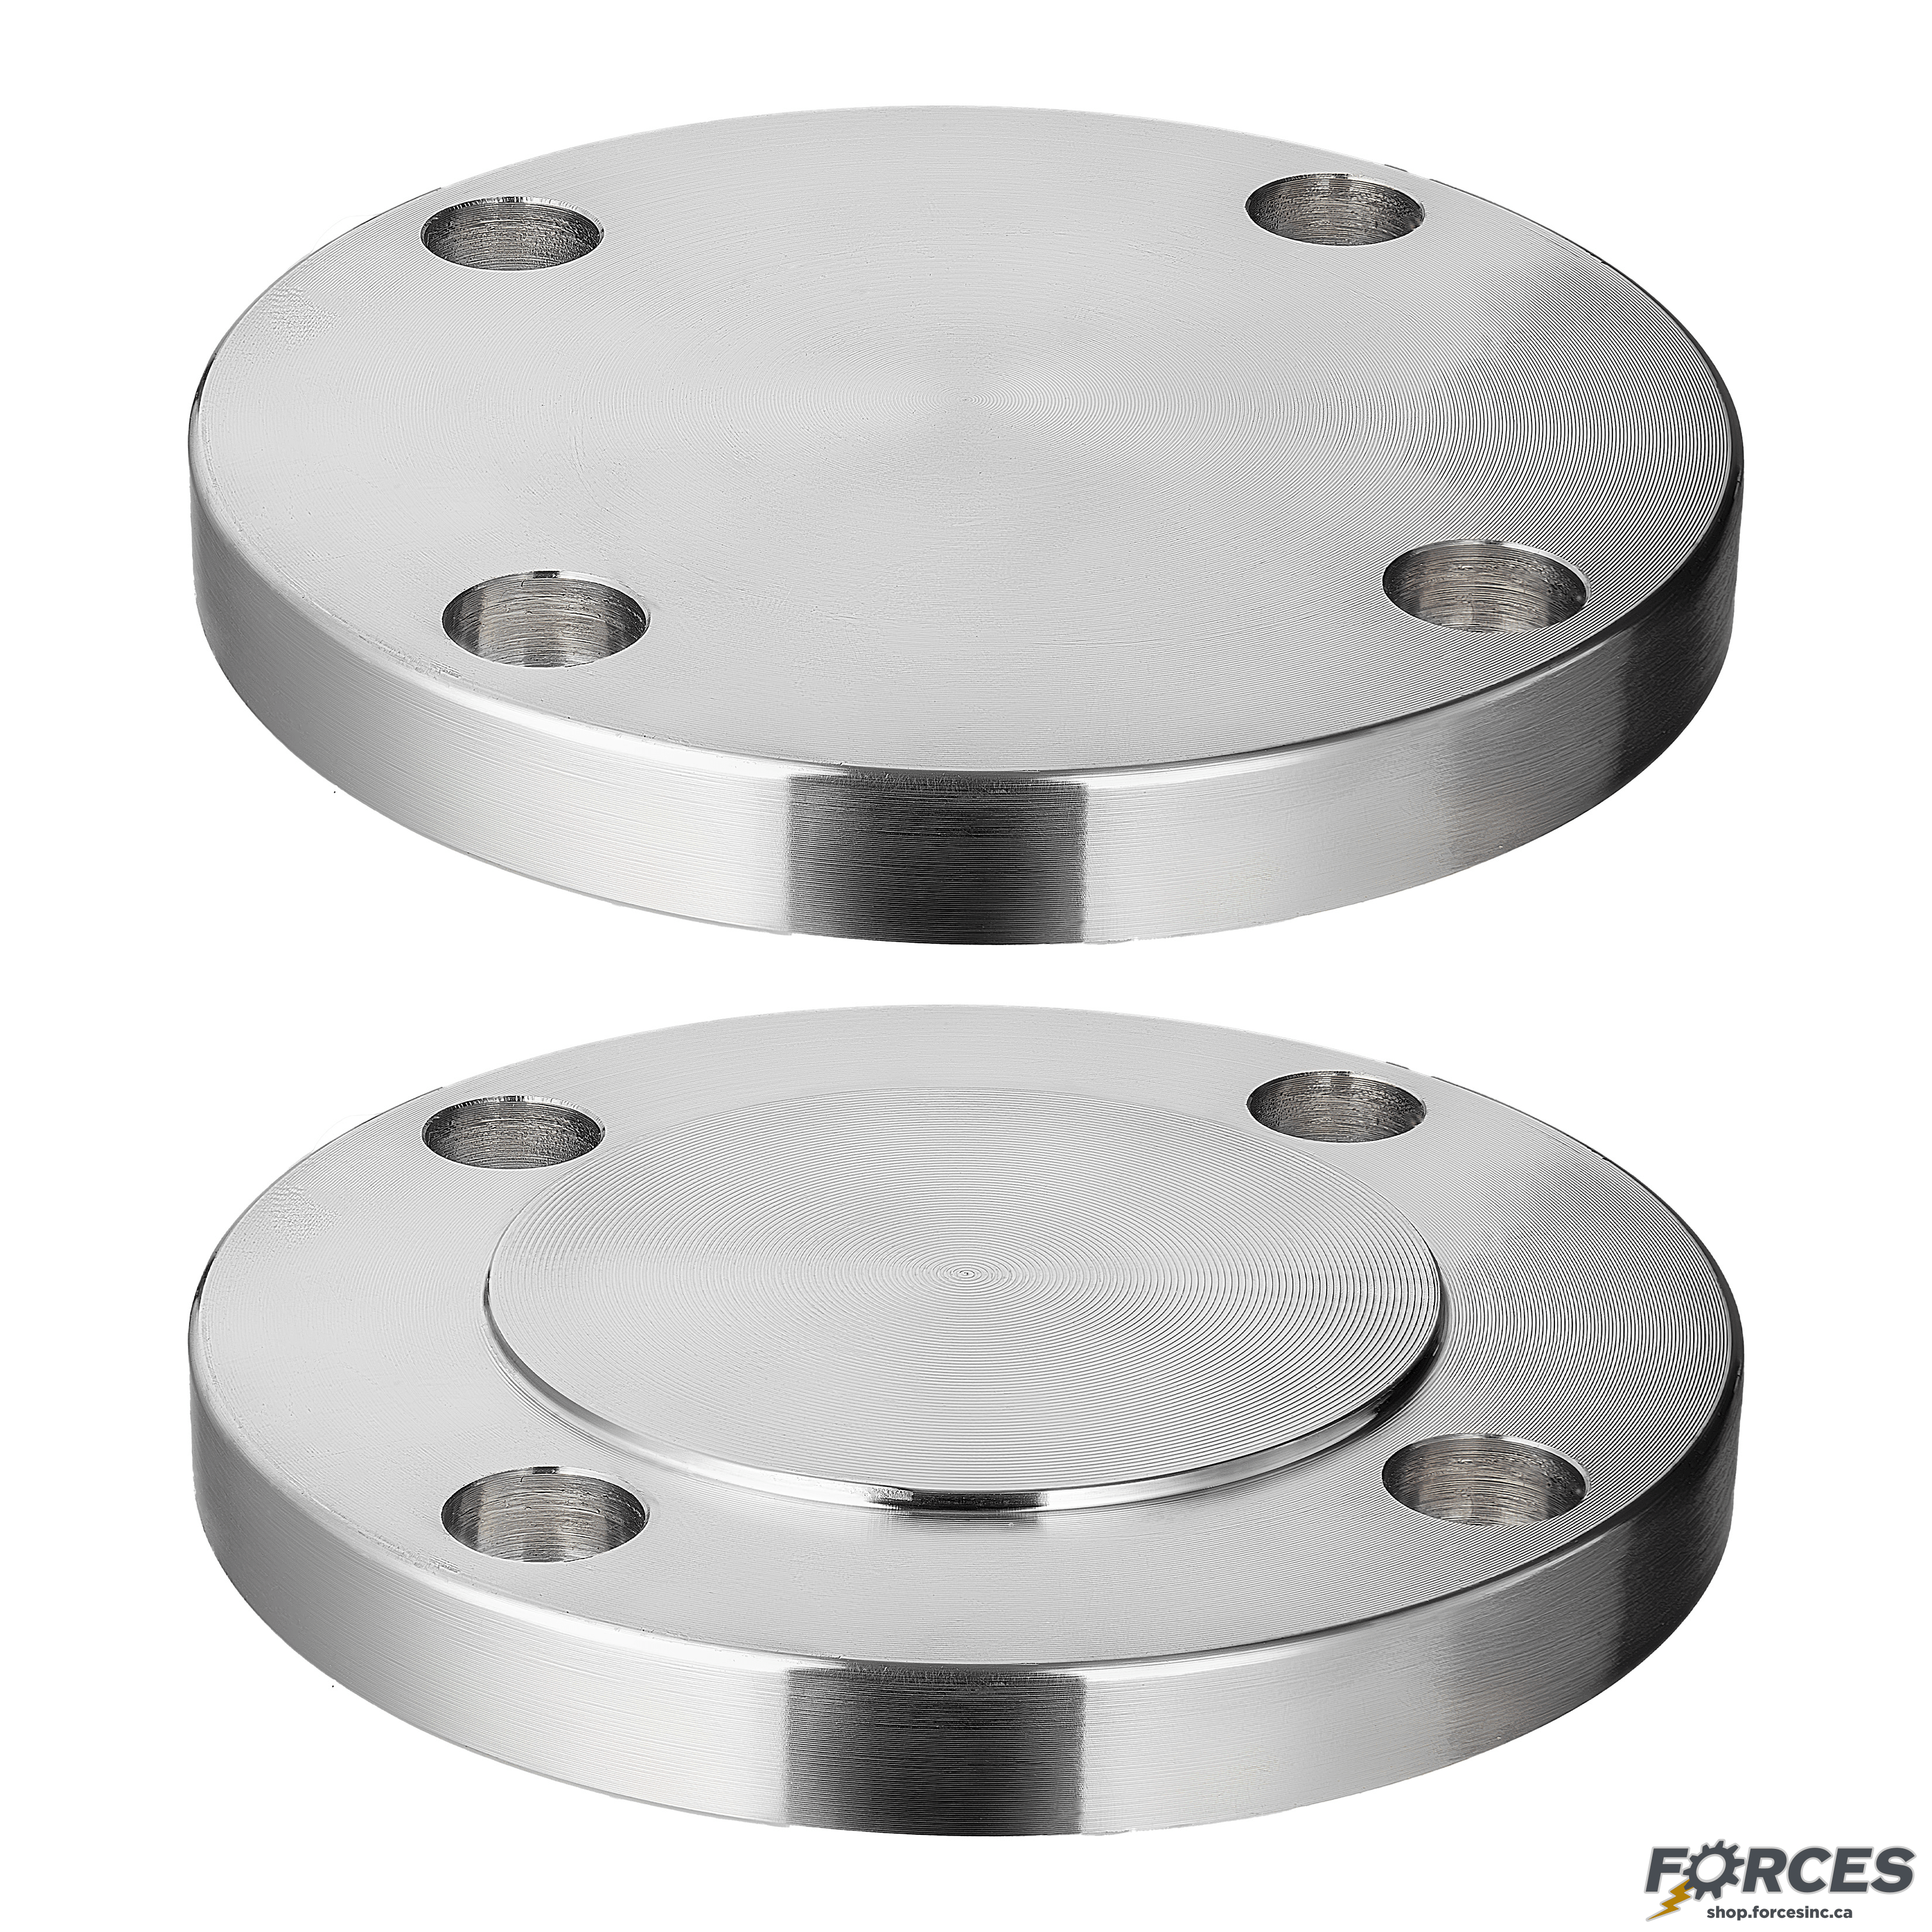 1/2" Blind Flange Class #150 - Stainless Steel 304 - Forces Inc